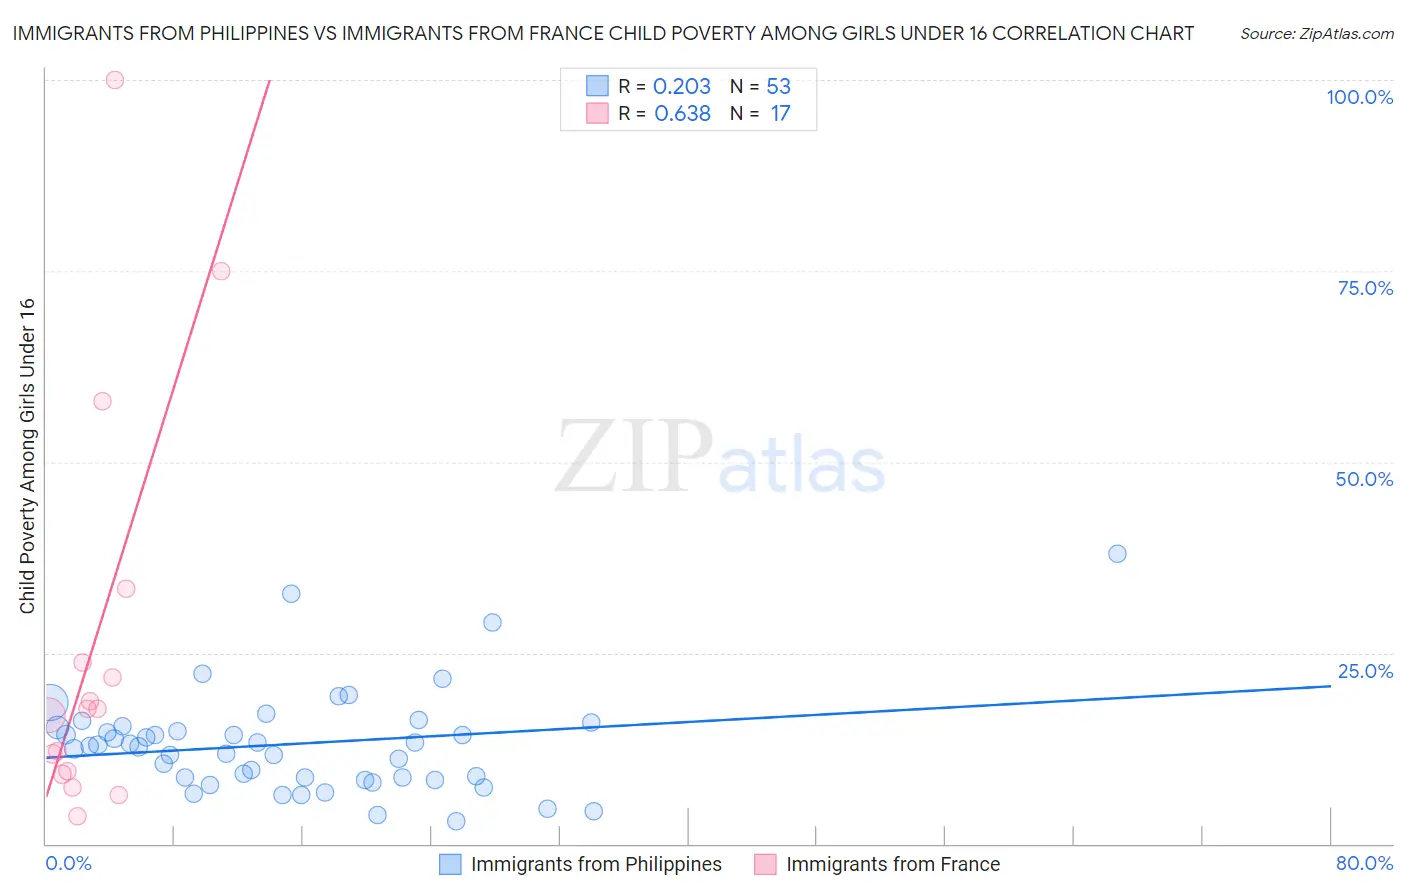 Immigrants from Philippines vs Immigrants from France Child Poverty Among Girls Under 16